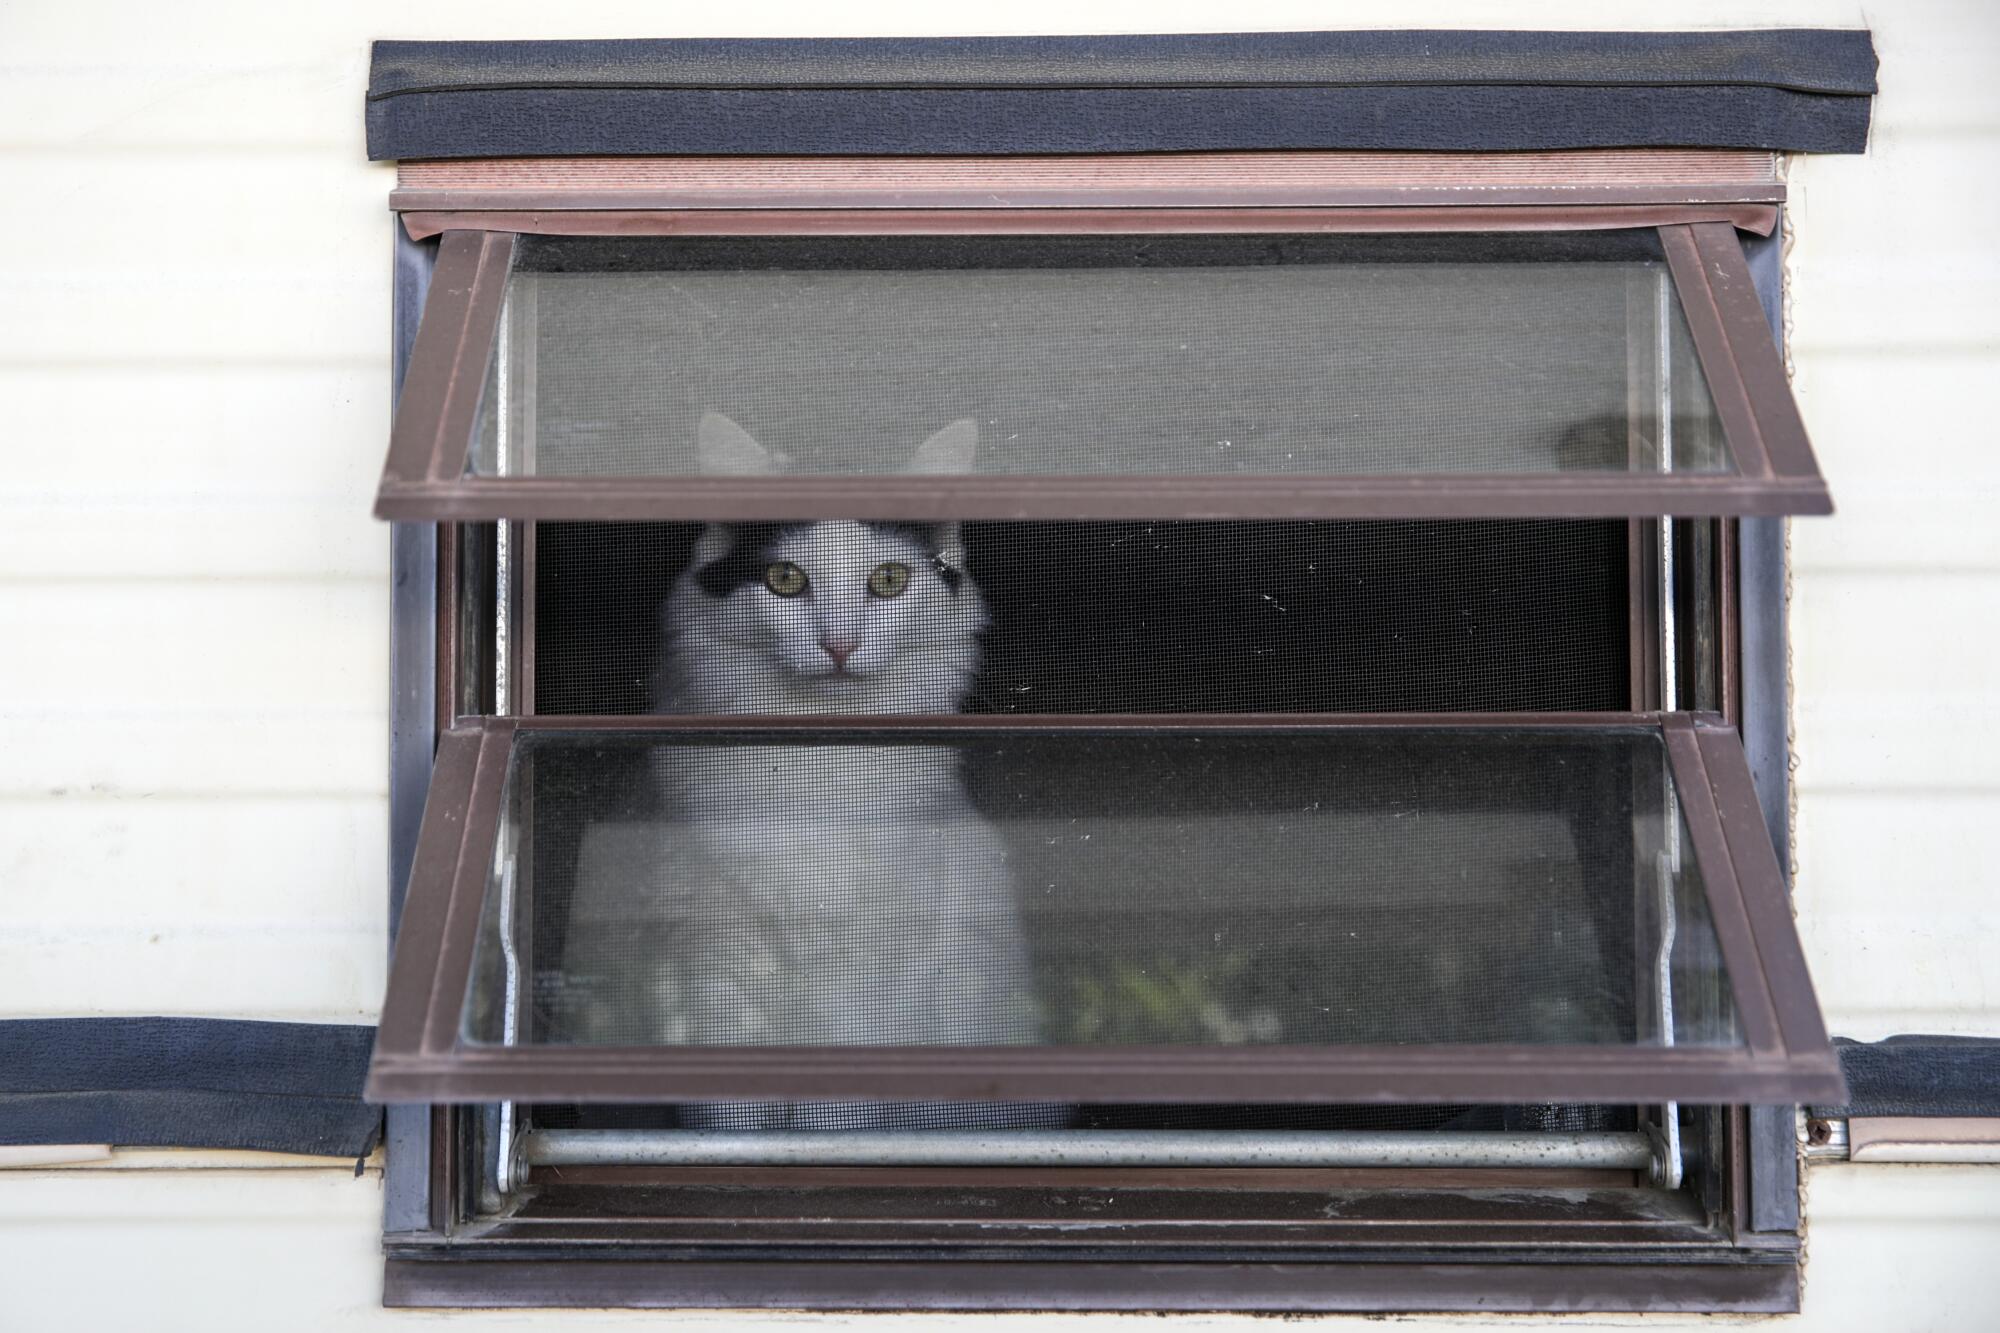 A cat is seen from the outside looking out a window screen.